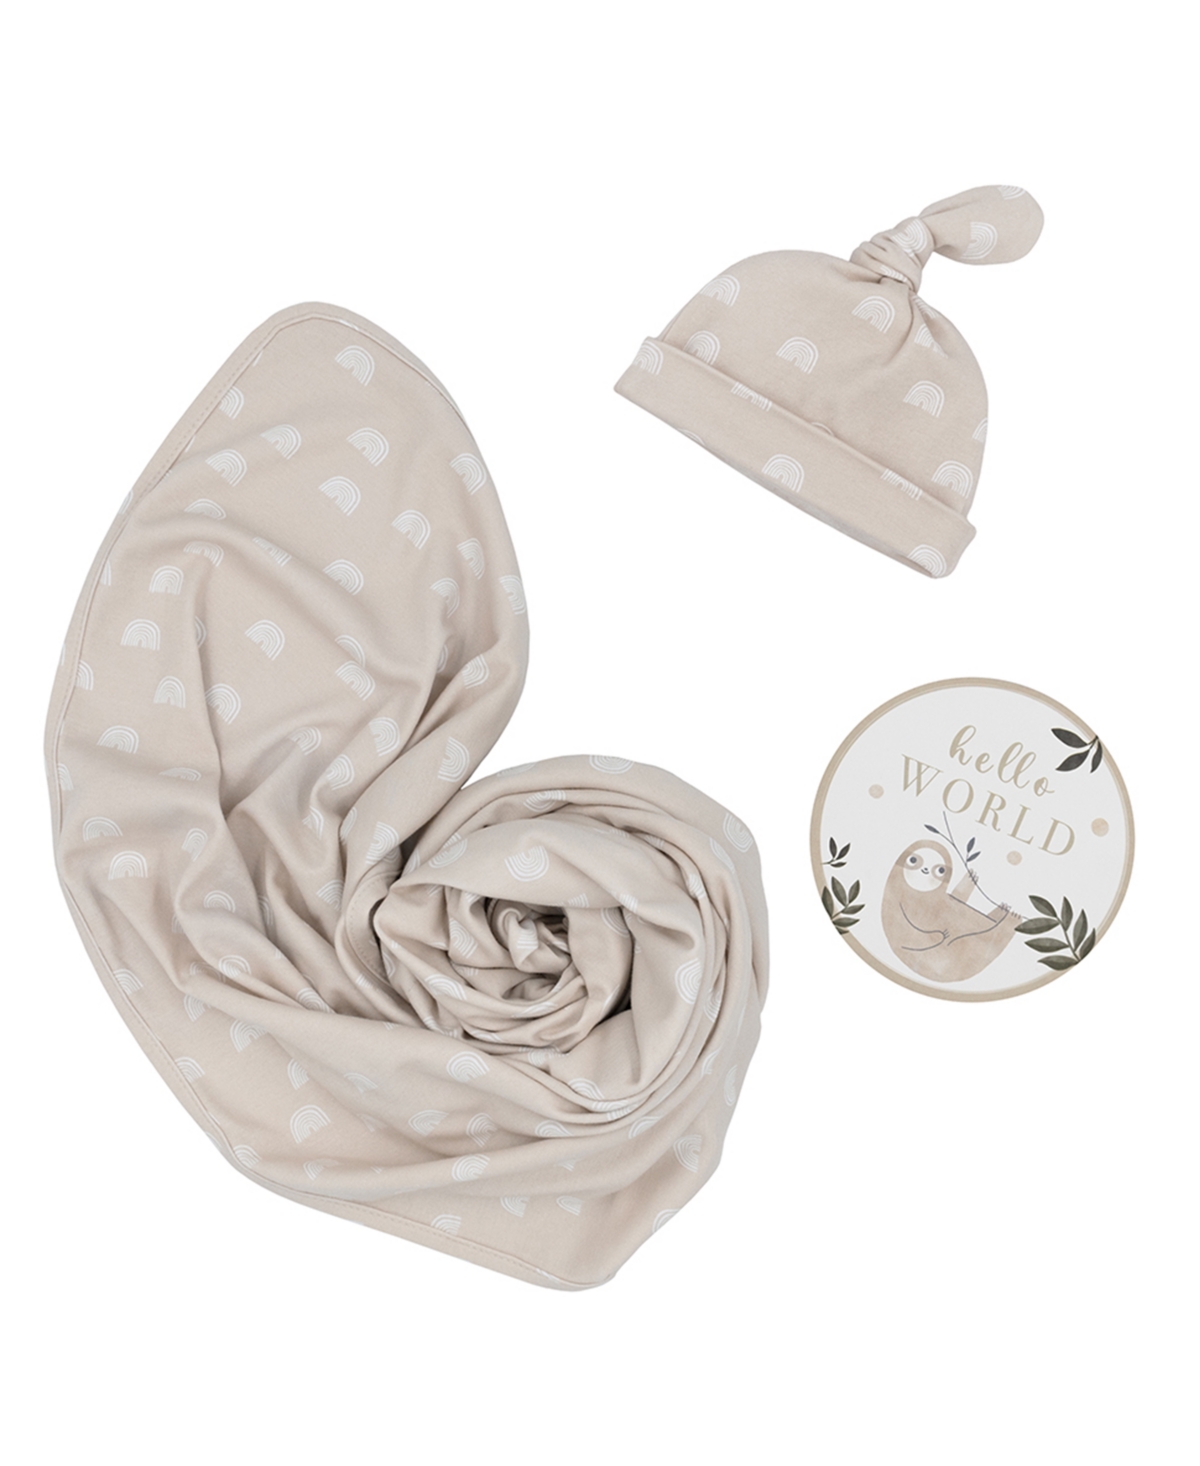 Living Textiles Baby Boys Or Baby Girls Hello World Gift Set, 3 Piece In Taupe